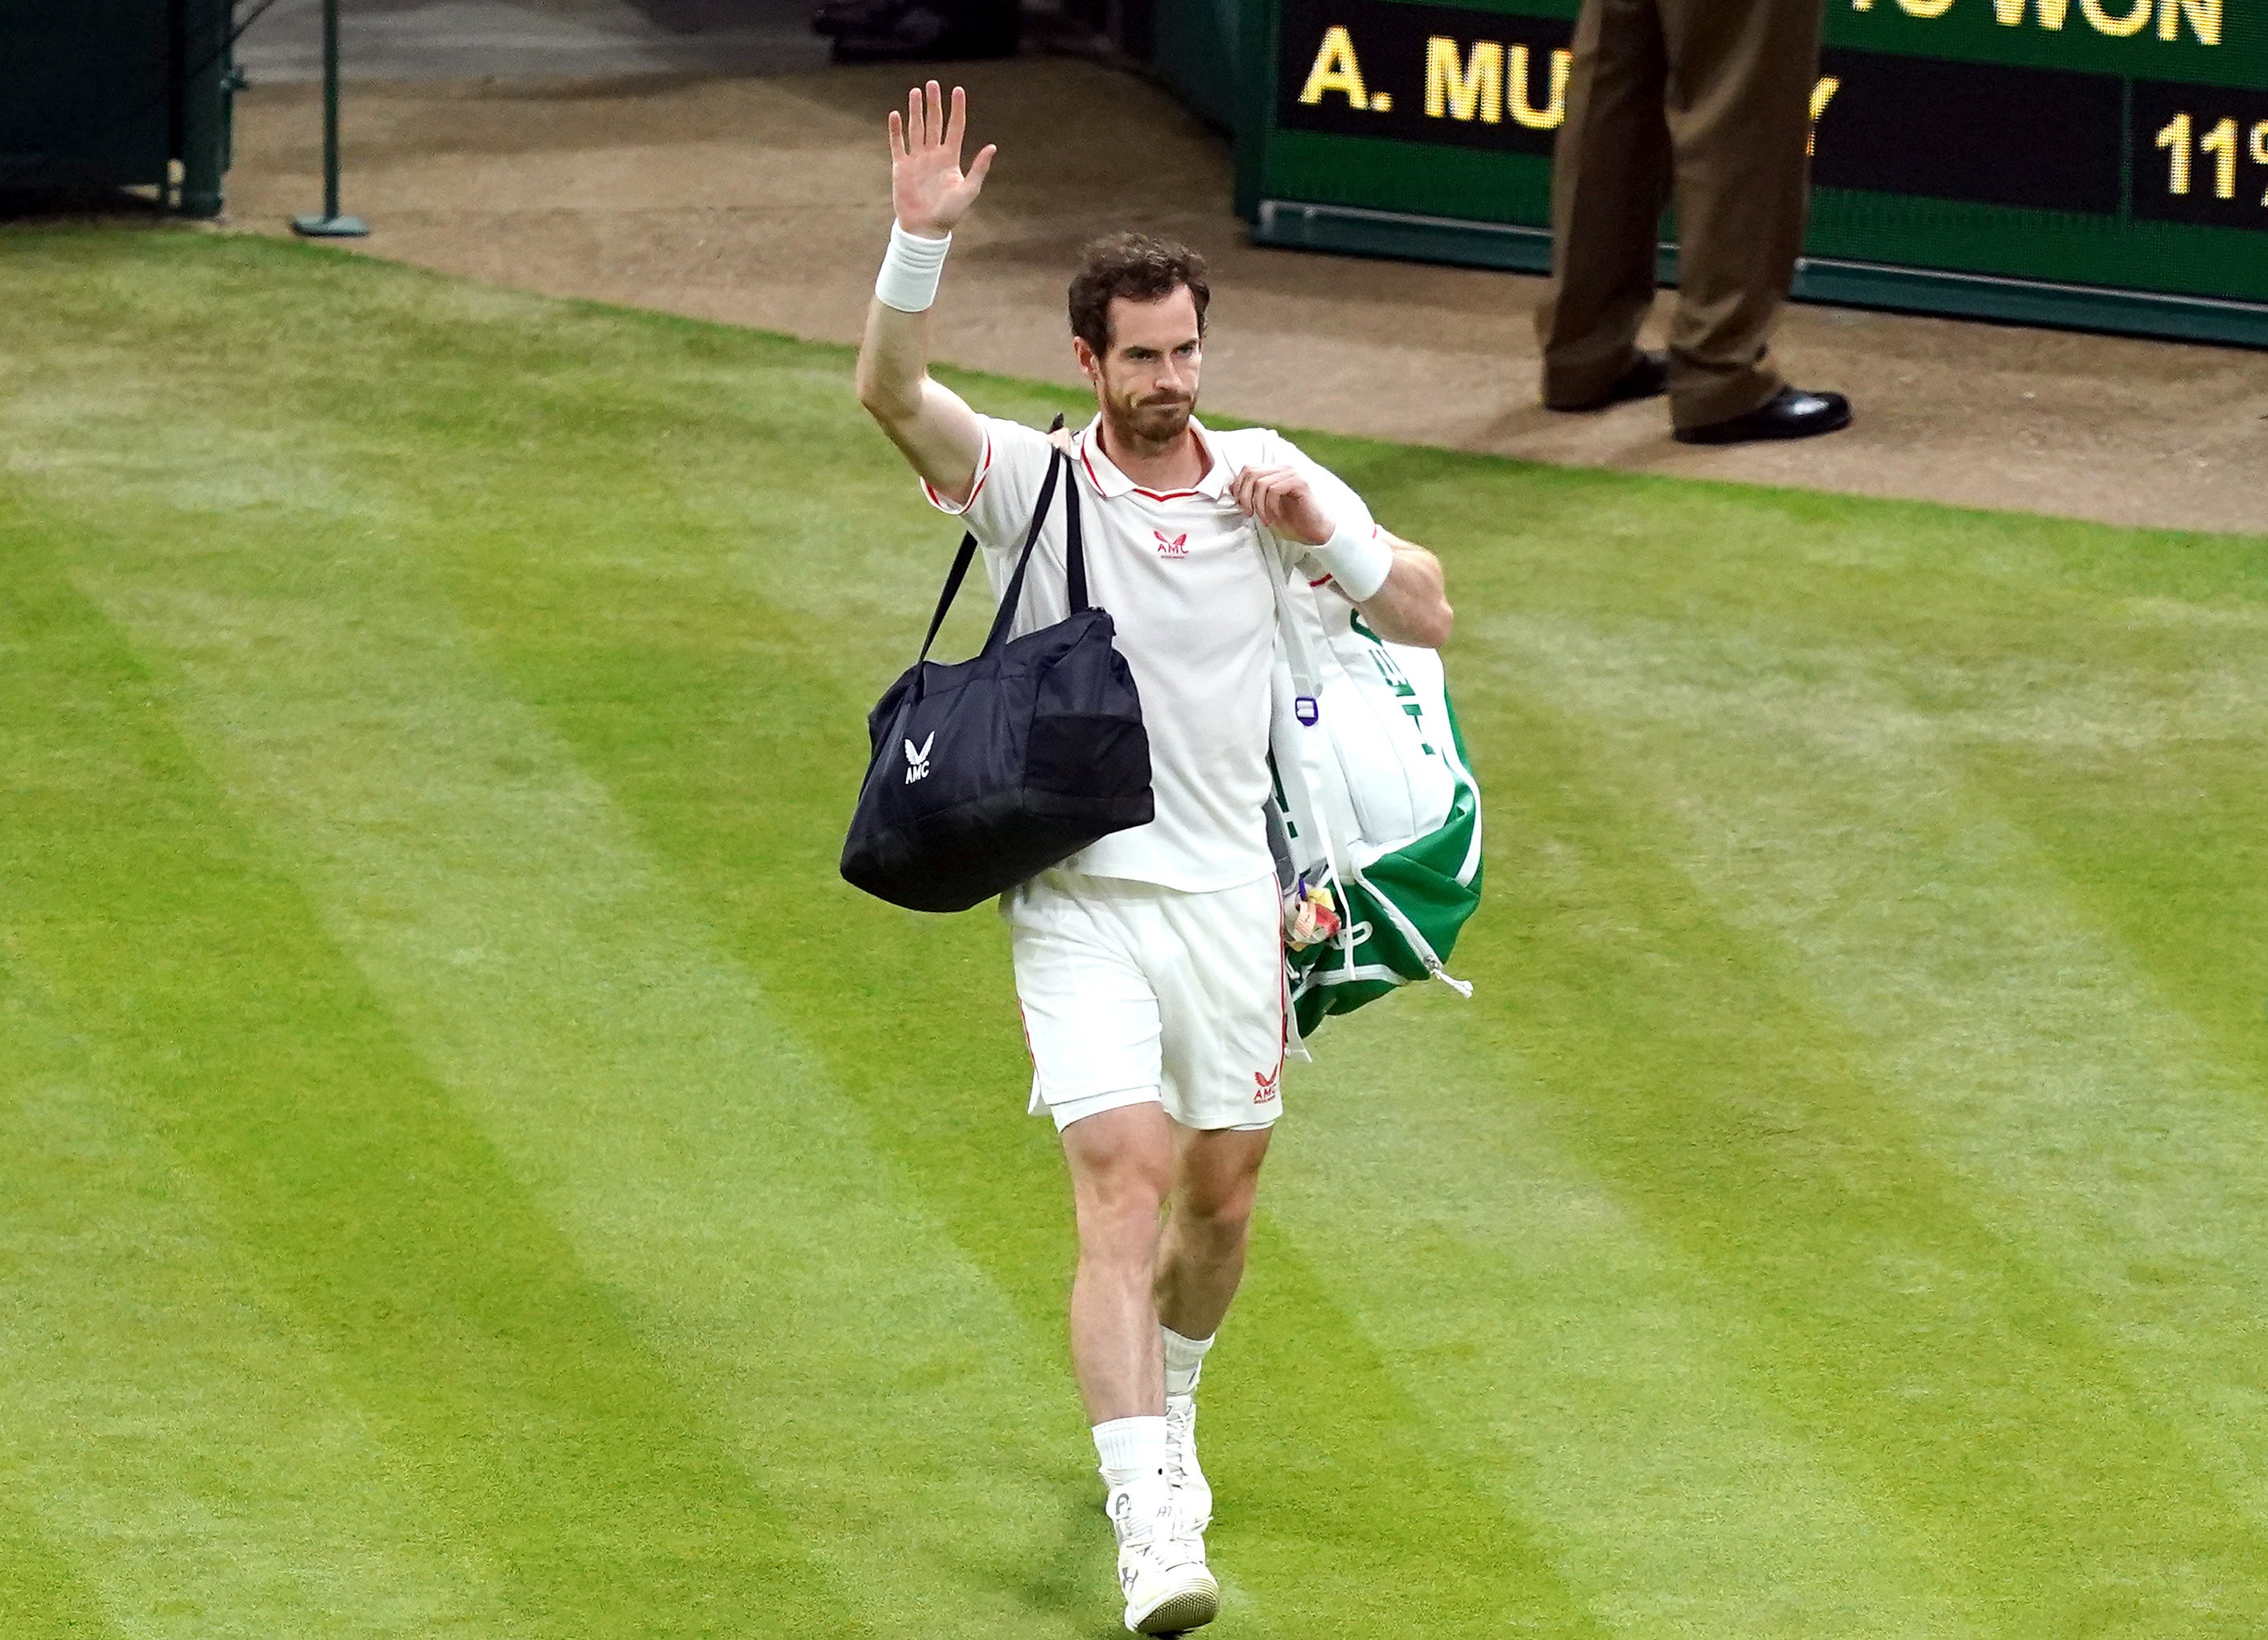 Tim Henman believes that Andy Murray can still reach the second week of Grand Slams